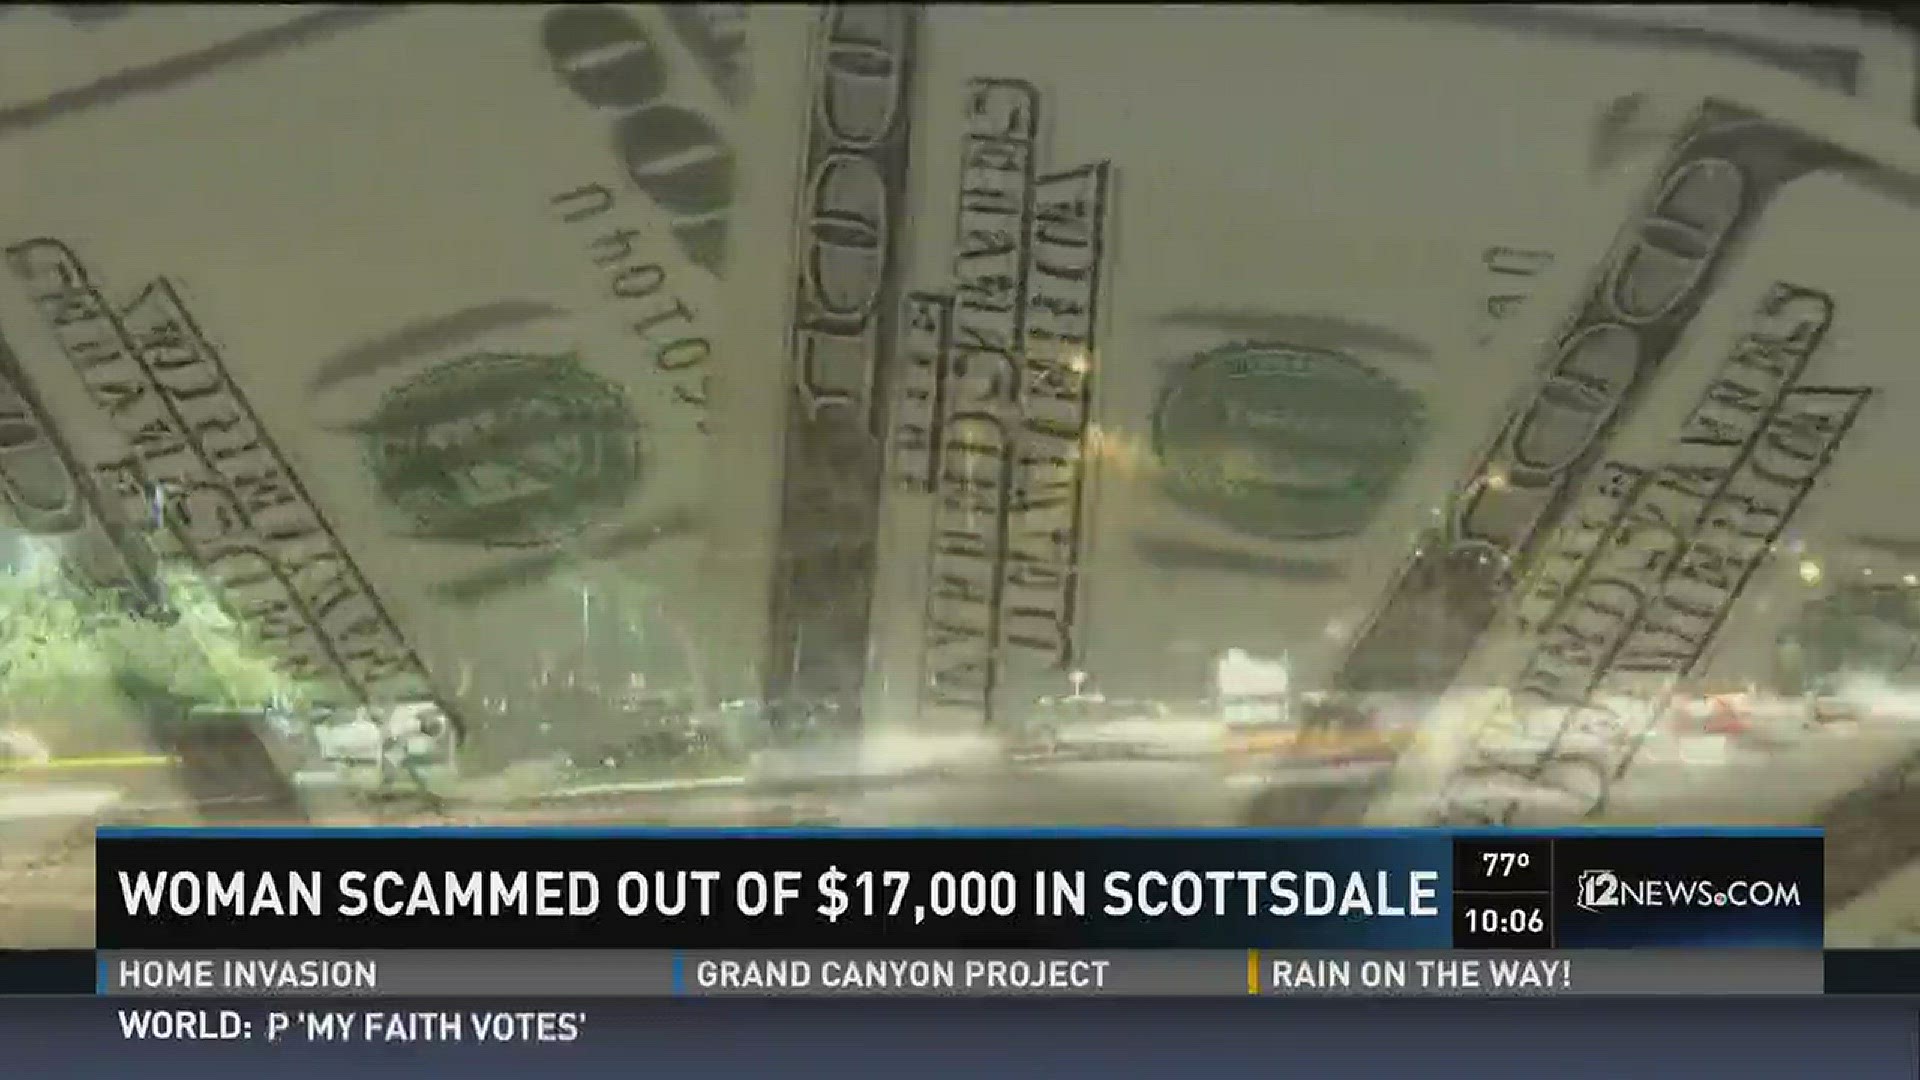 Woman scammed out of $17,000 in Scottsdale.